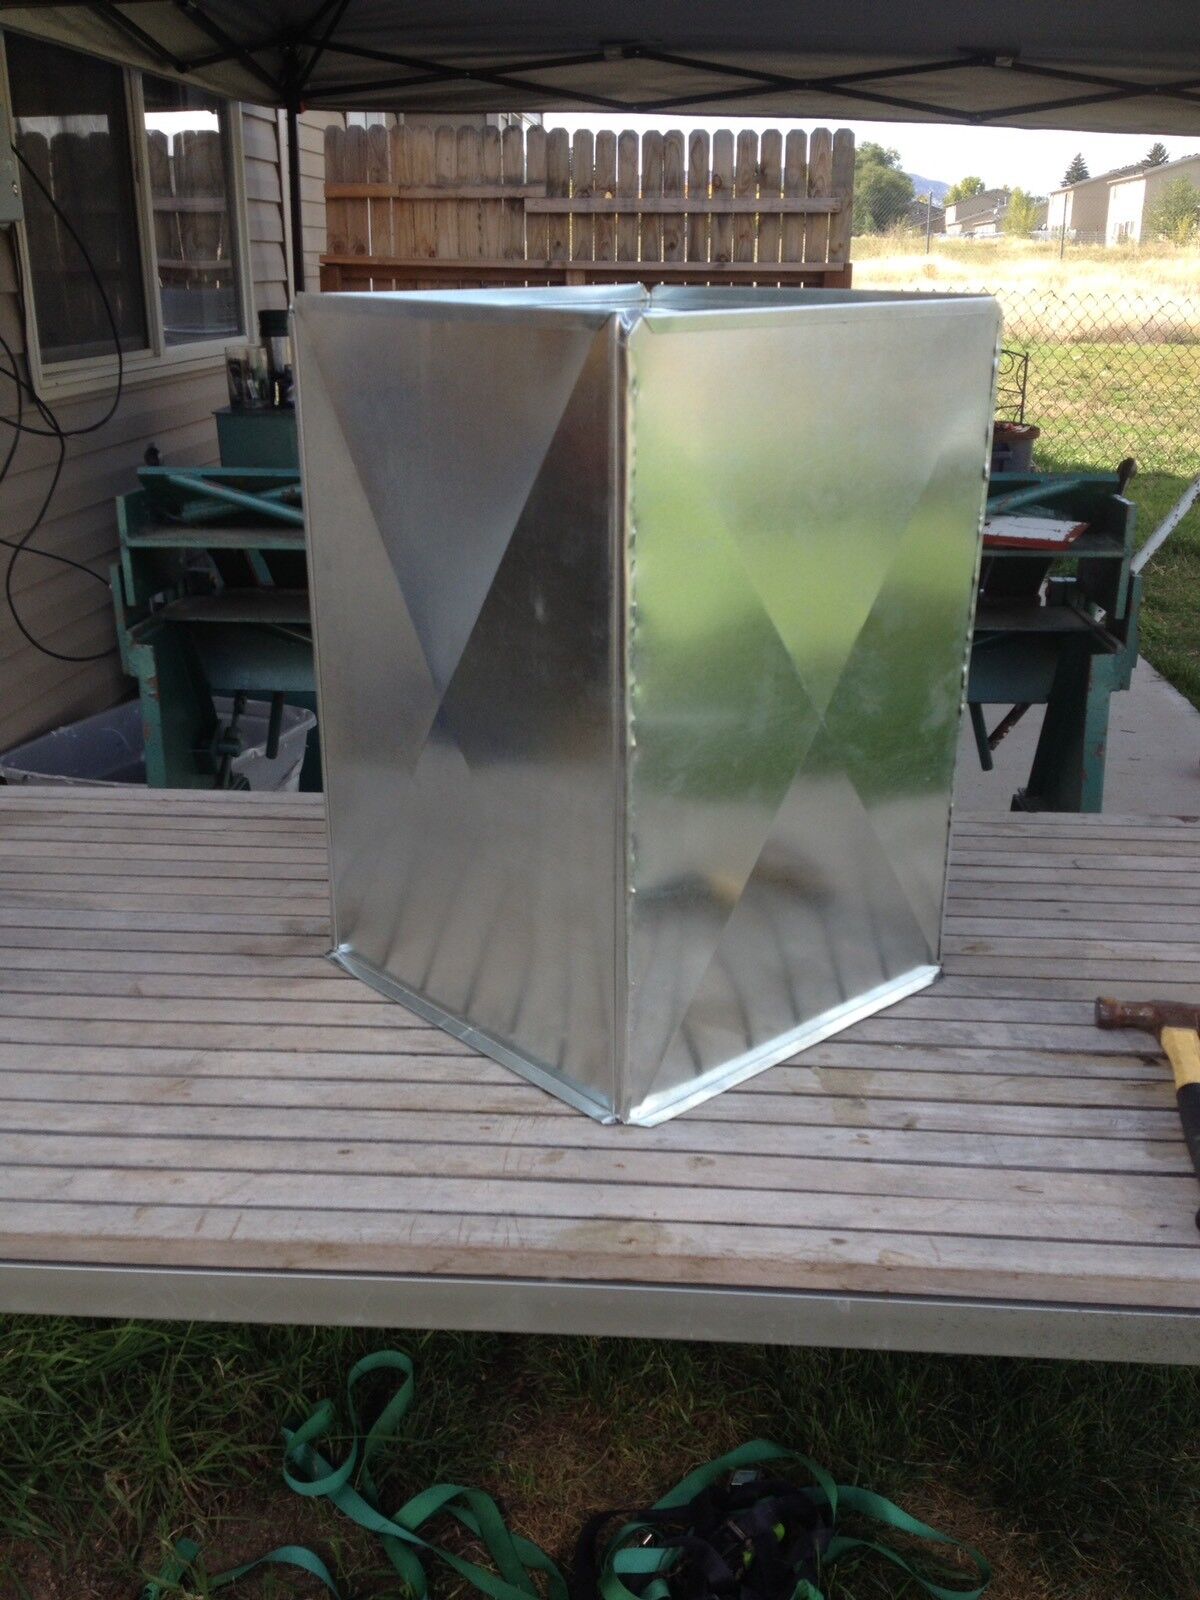 Supply Air Duct Plenum 20 X 20 X 24 Long With No End Cap Galvanized 26 Gauge